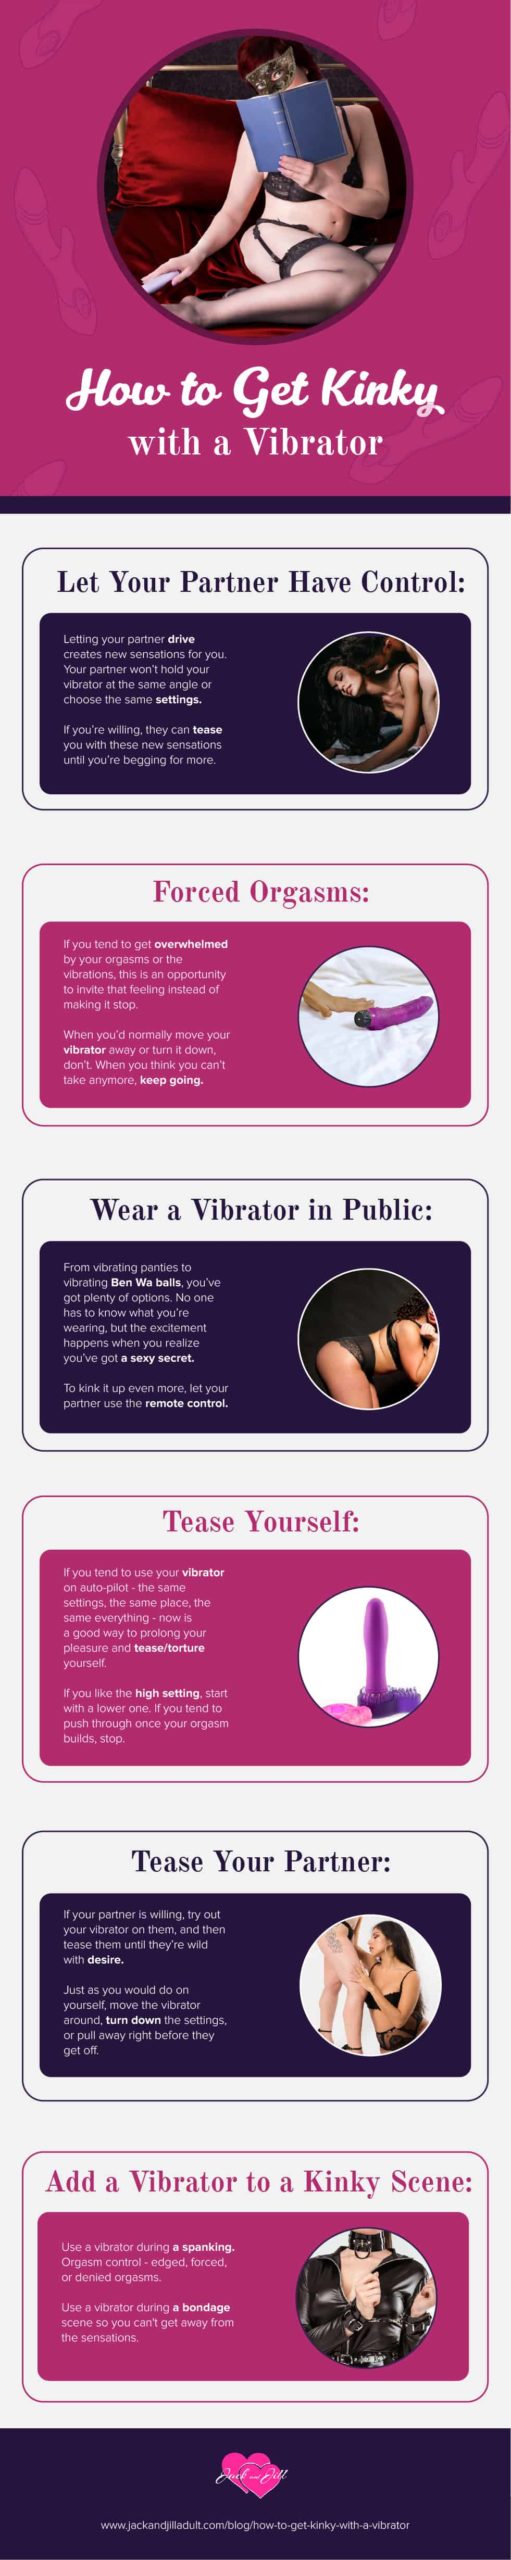 Infographic on How to Get Kinky with a Vibrator